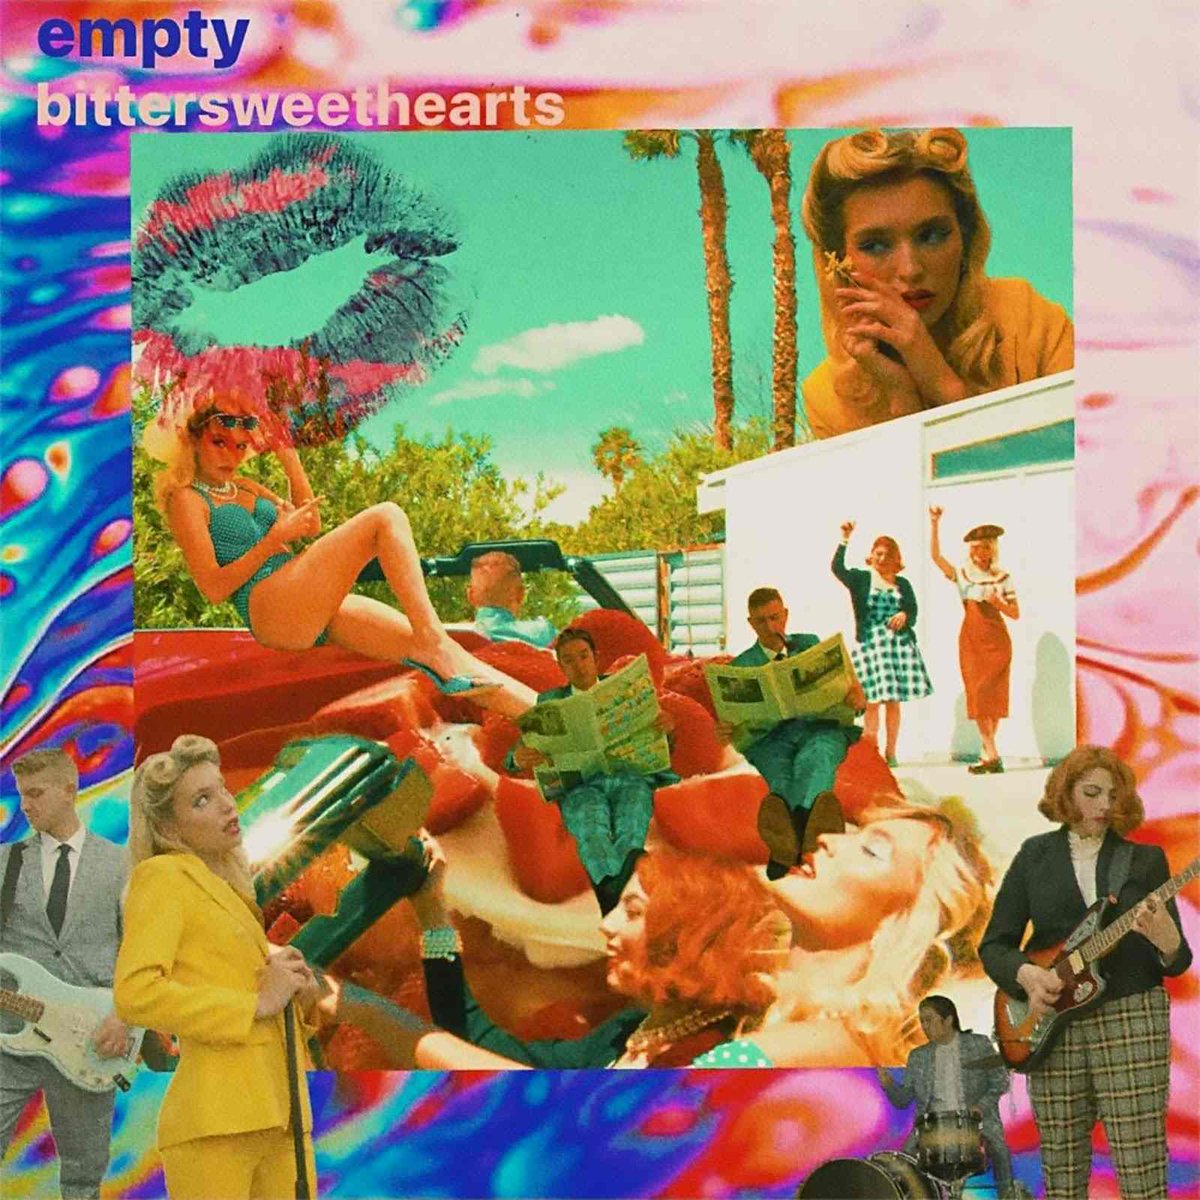 Rising Los Angeles alt-indie rockers Bittersweethearts are back with their strongest song to date, the instantly catchy and uplifting single and video ‘Empty’.

The enchanting front woman Zoe Infante sets the tone, “I was in a failing relationship that was so draining. People in